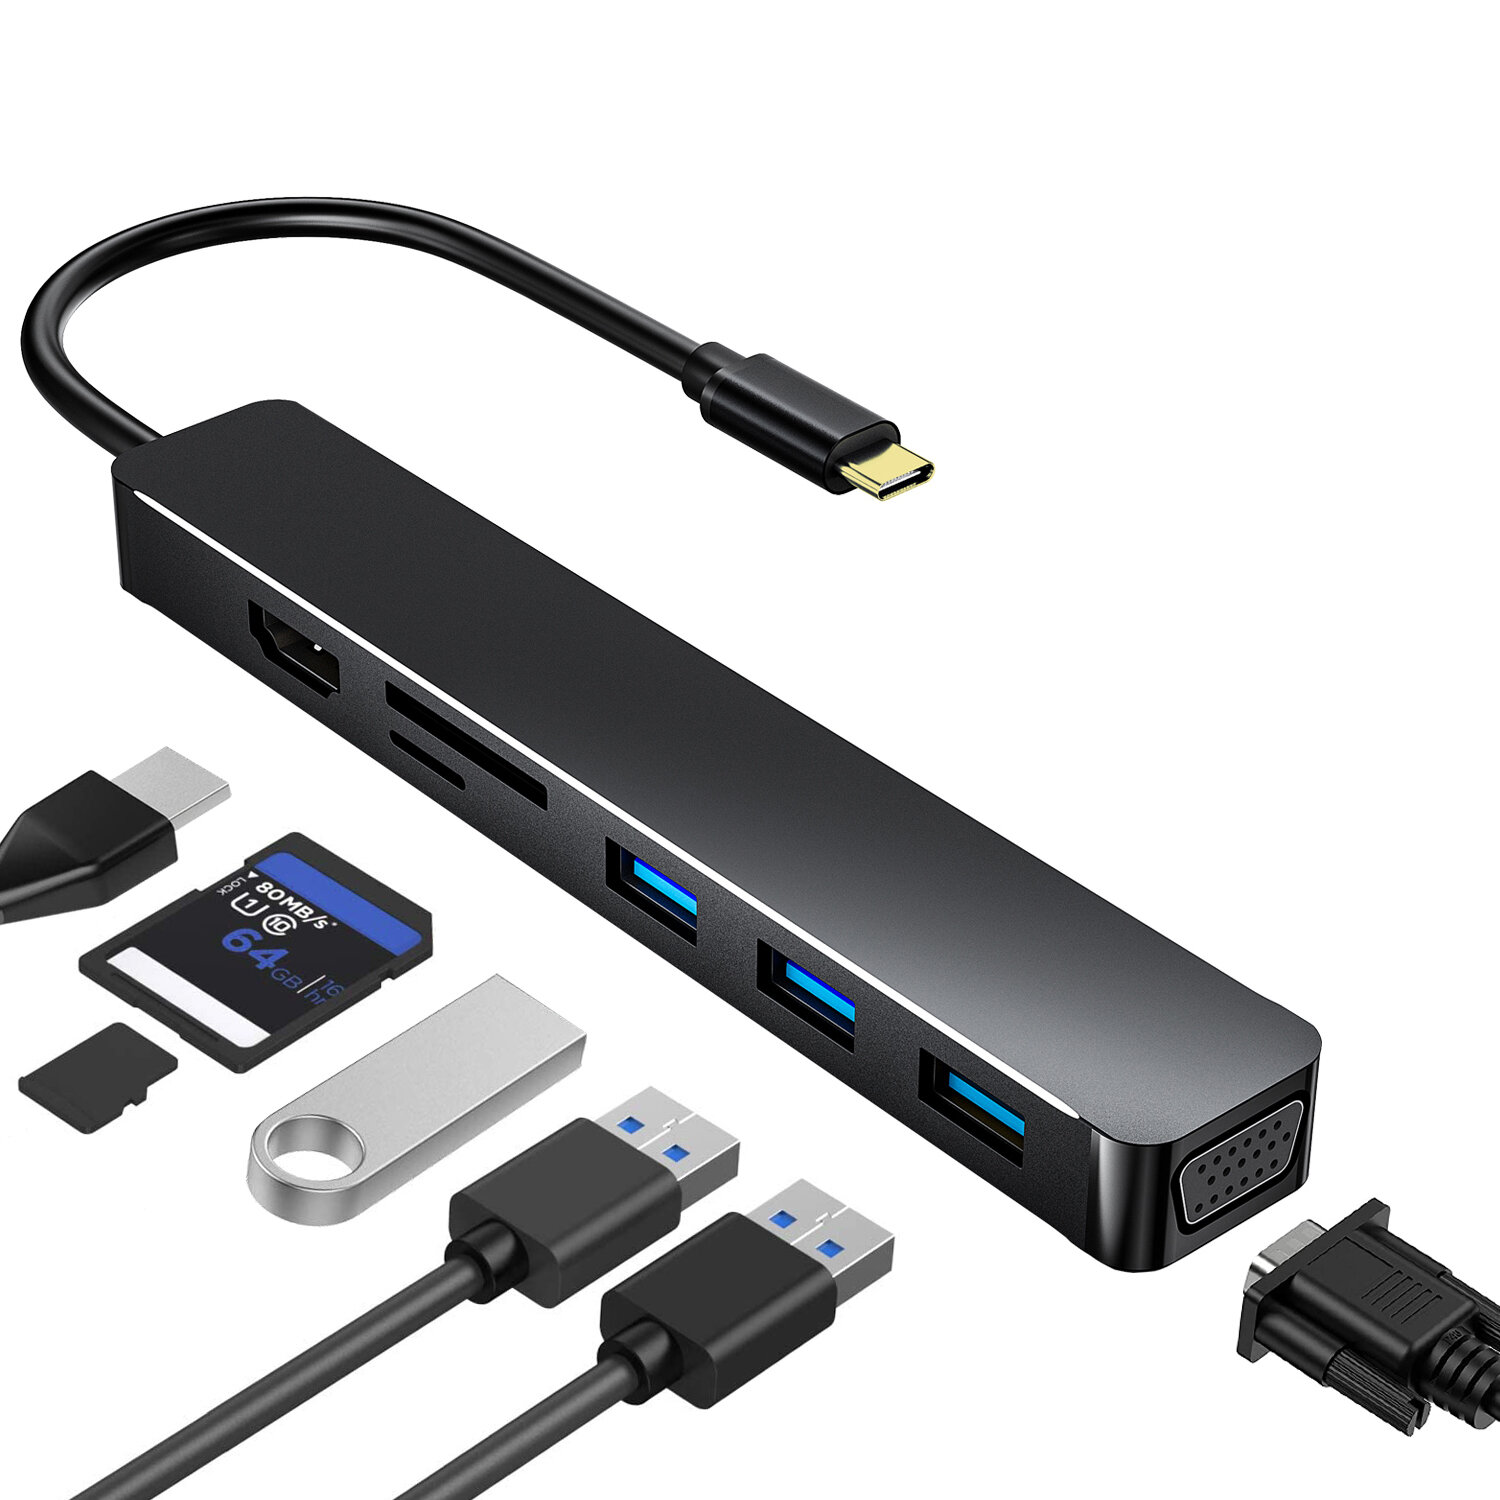 

Bakeey 7-in-1 USB-C HUB Docking Station Adapter With 4K HDMI / VGA / USB3.0*3 / Memory Card Readers